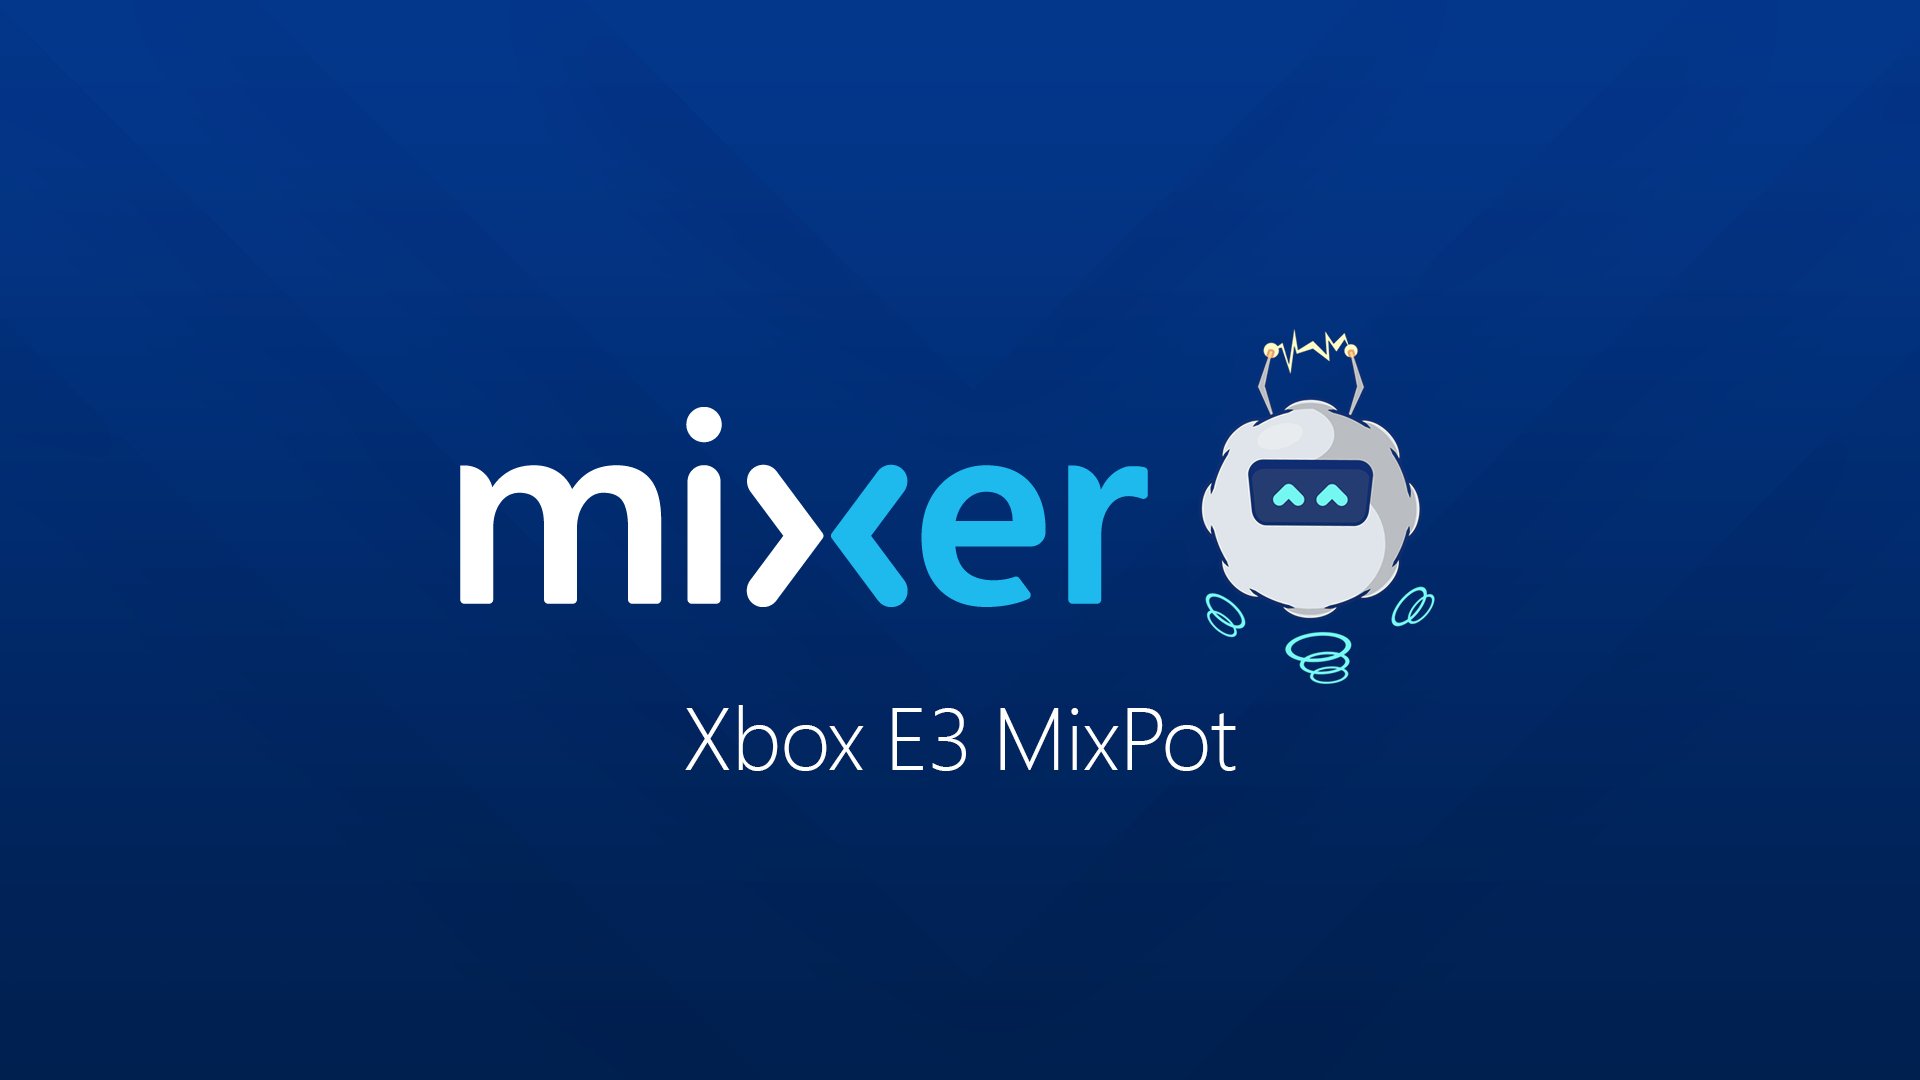 geboorte Smash Symptomen Xbox on Twitter: "Get a MixPot full of digital freebies when you sign in  and watch tomorrow's briefing on @WatchMixer: https://t.co/GsJsYwg0sk # XboxE3 https://t.co/5Oyu3FIEBB" / Twitter